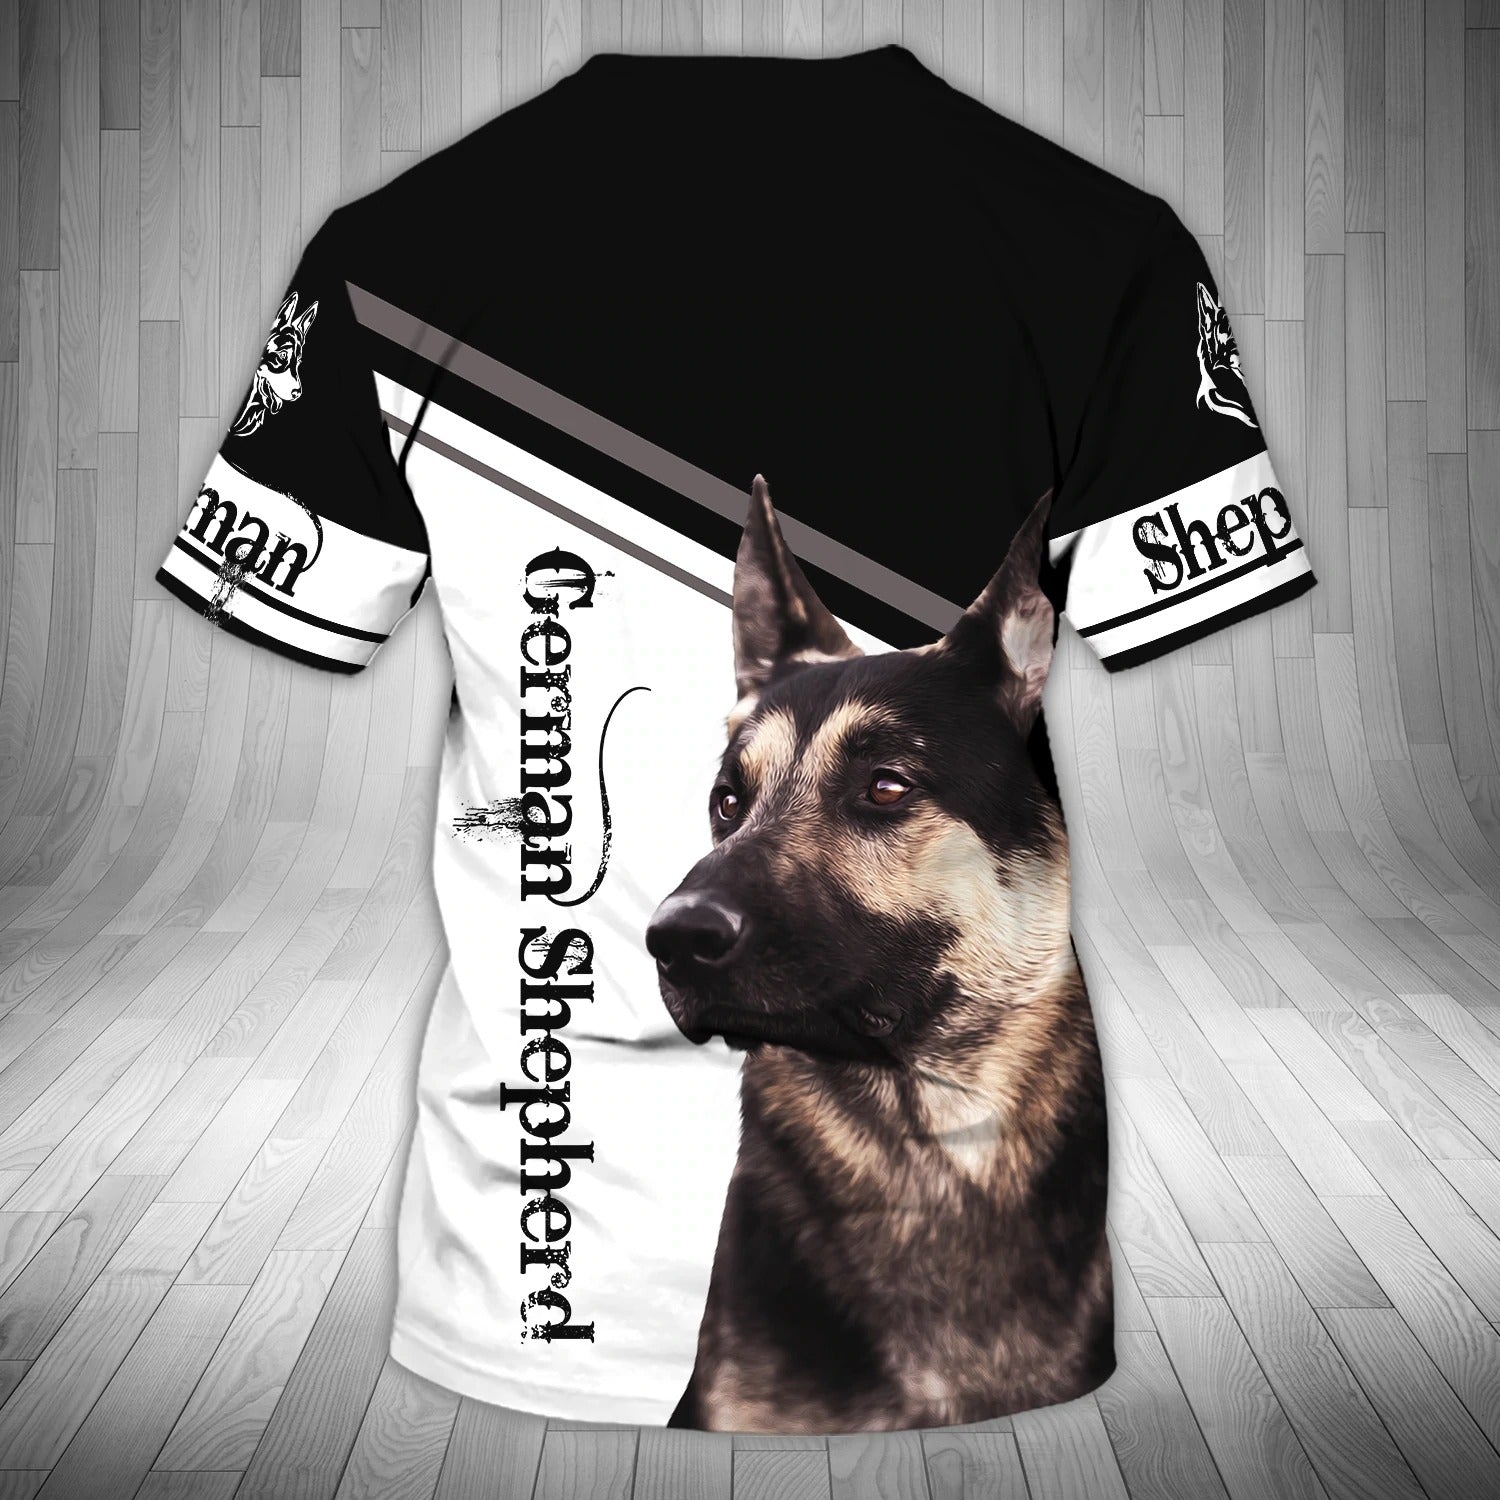 Personalized 3D All Over Printed Dog Tshirt For Men And Women/ Love German Shepherd Shirts In Us Flag/ Dog In Tshirt